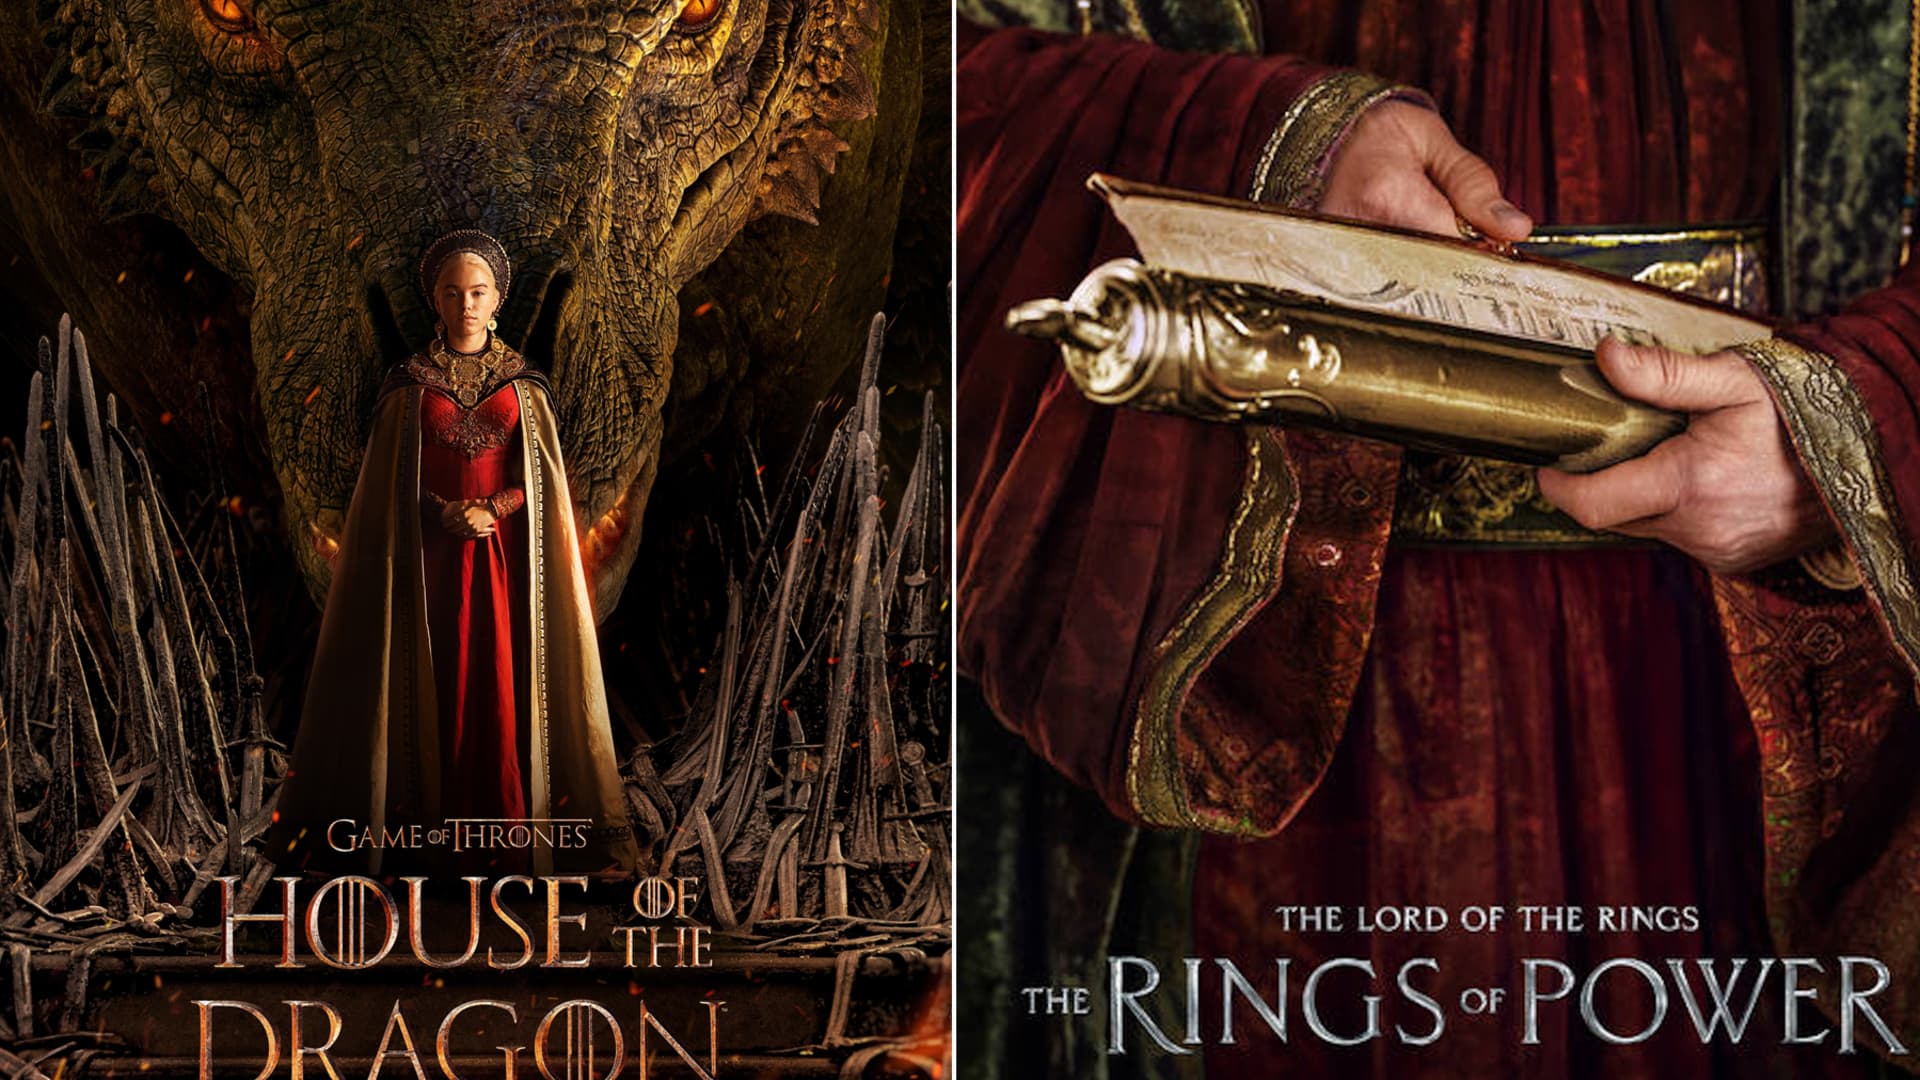 Here’s what’s at stake for HBO’s ‘House of the Dragon’ and Amazon’s ‘The Rings of Power’